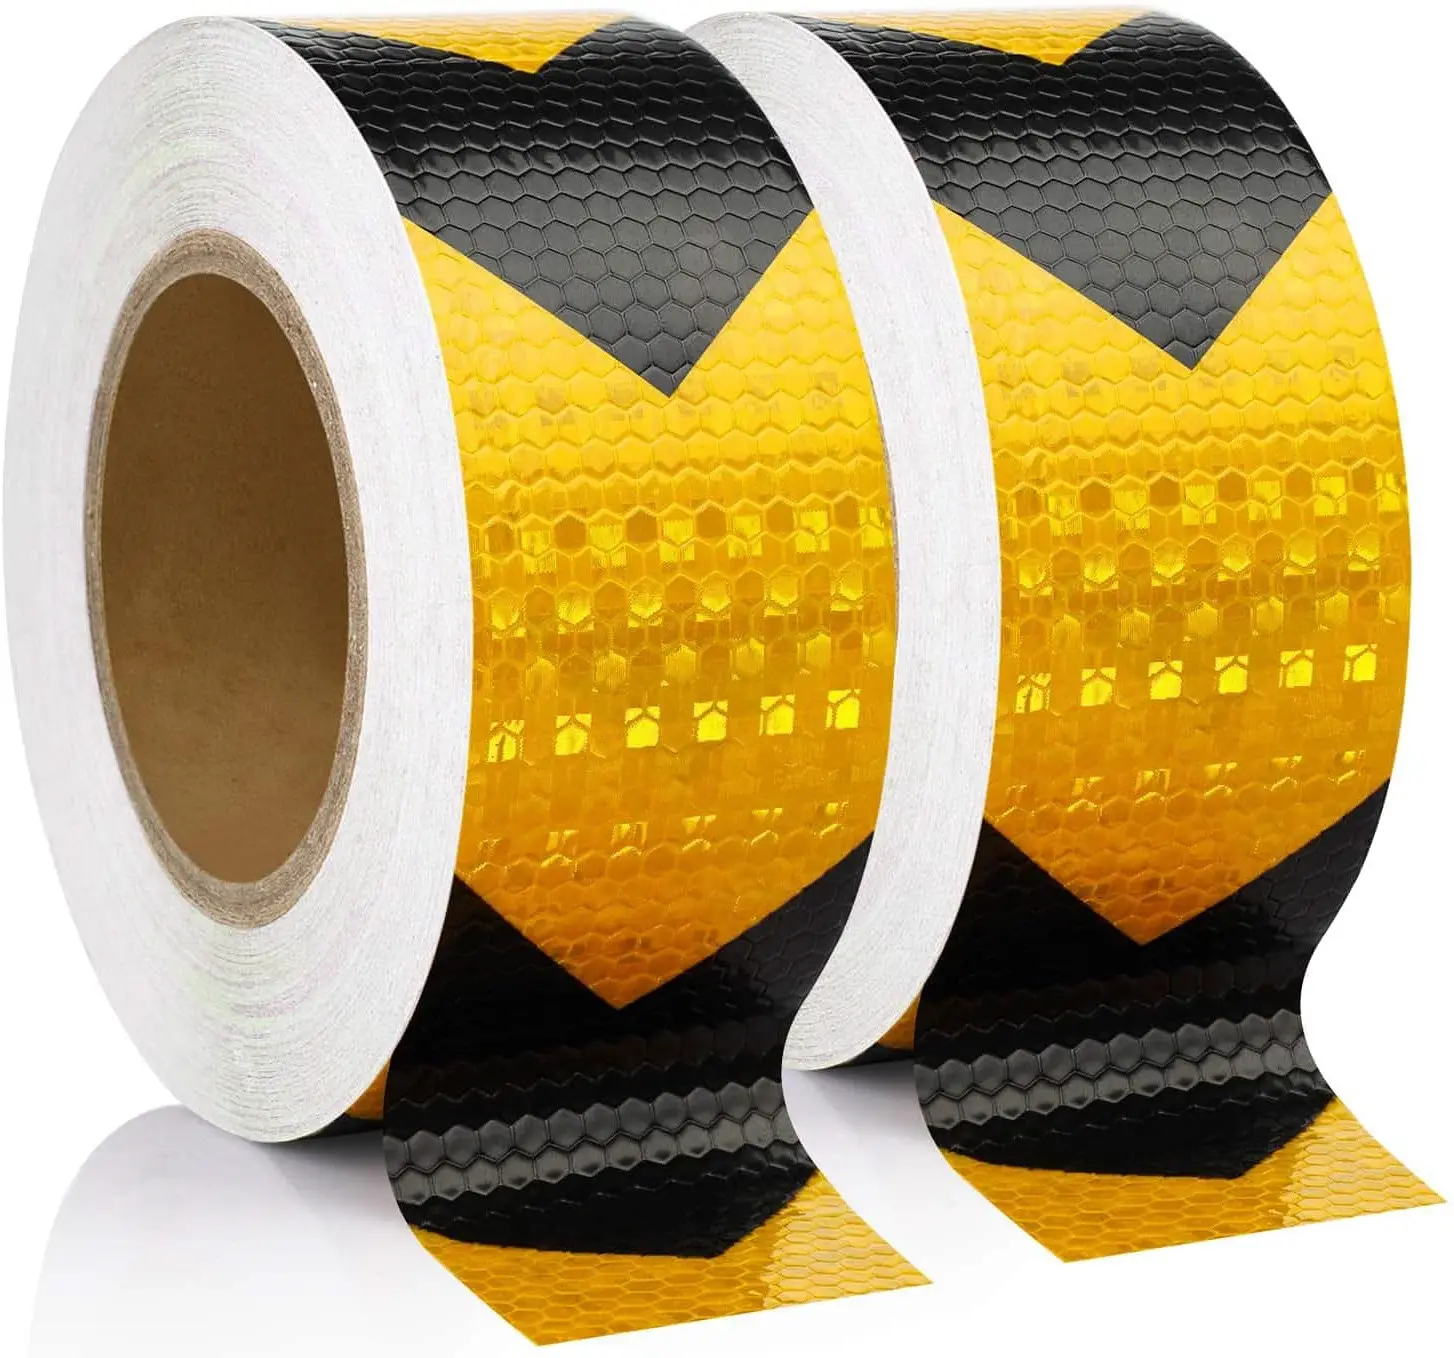 PVC Self Adhesive Safety Reflective Tape Arrow Warning Reflective Stickers Strips Warning Tape for Car Trucks Trailer